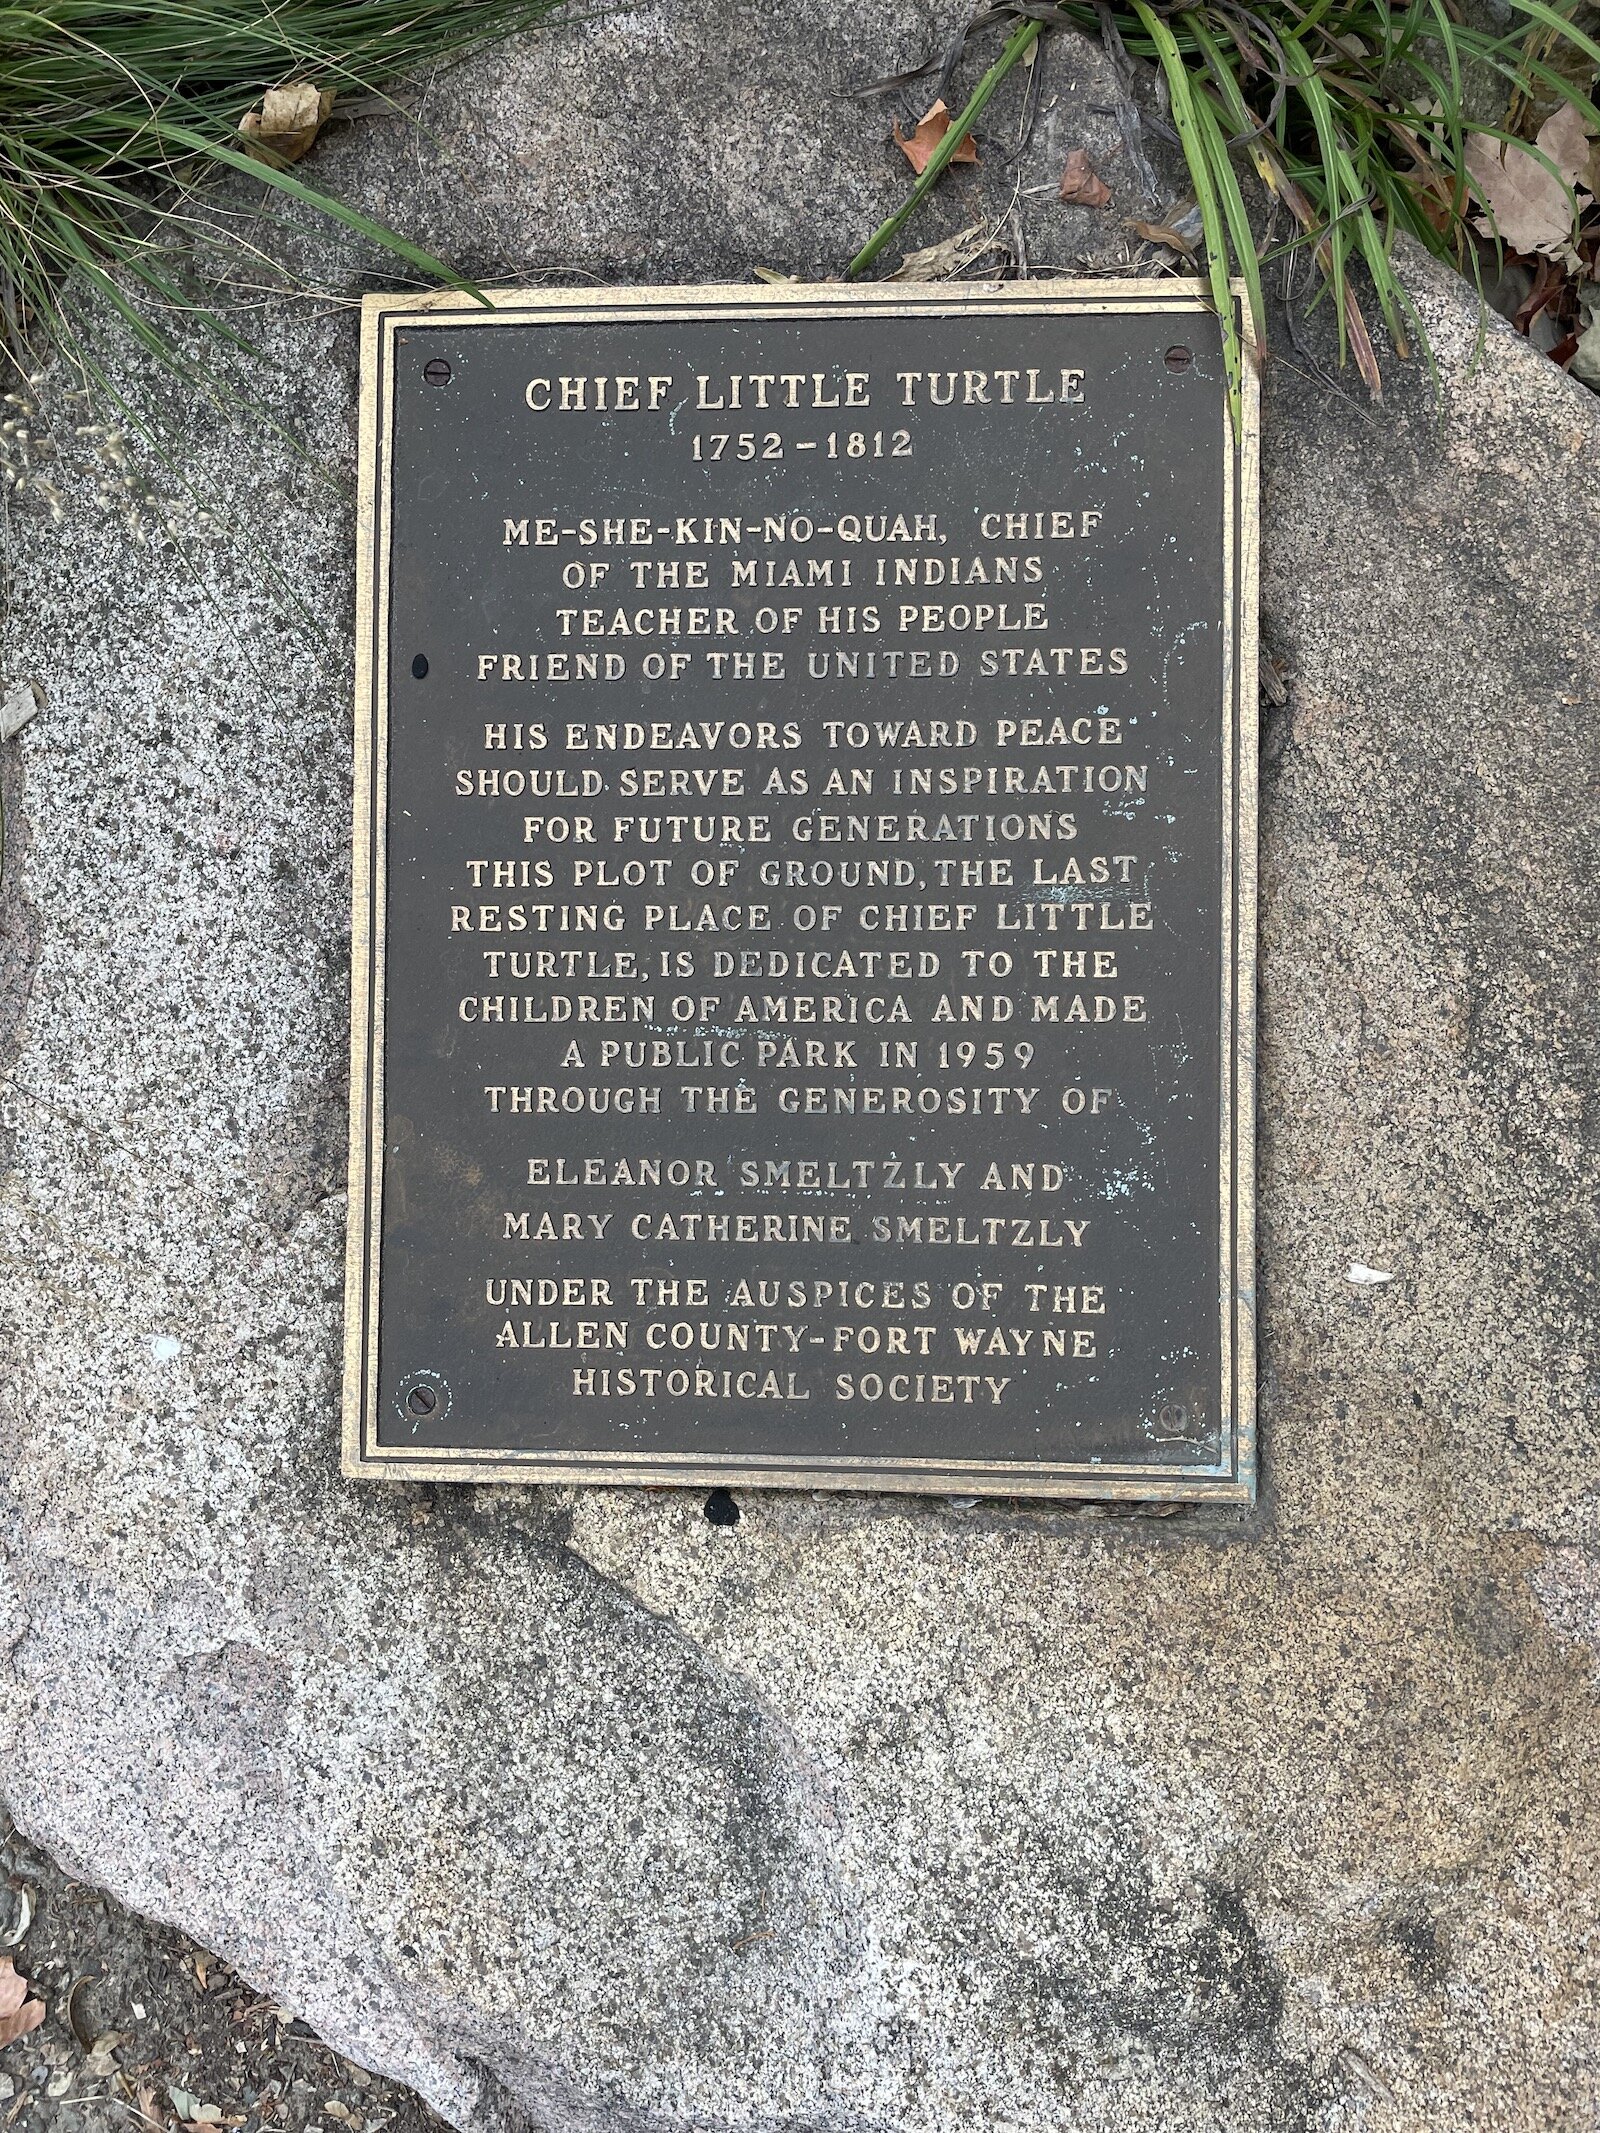 The grave of Little Turtle is marked at the front of a larger memorial park to the late Miami Chief.